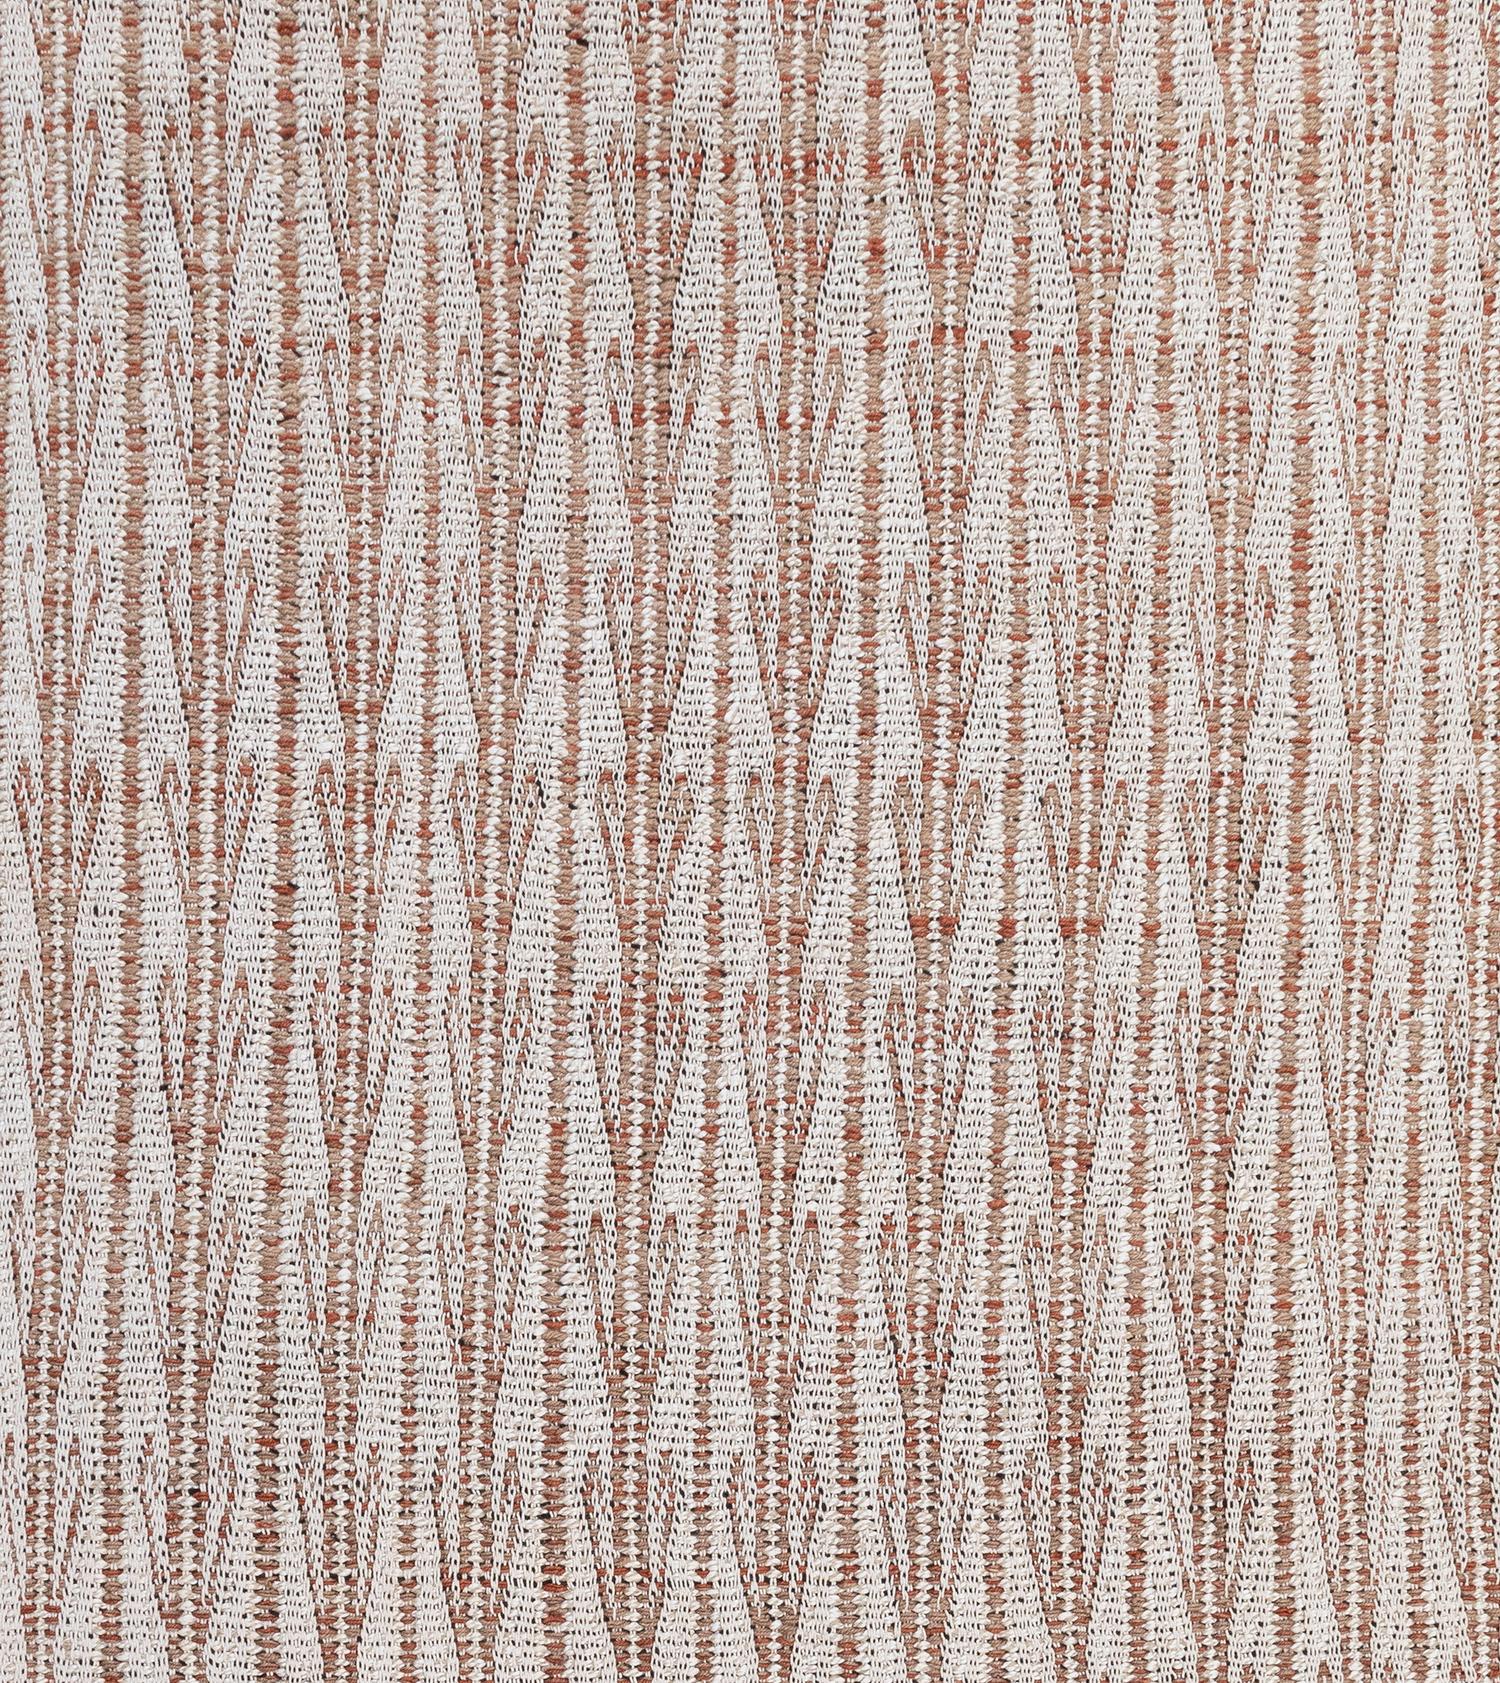 NASIRI is ushering in a new era of flatweave rugs, ones marked by texture and dimension, providing a luxurious look never before seen in other flatweaves.  We are continuously expanding our collections by being innovative in design and implementing